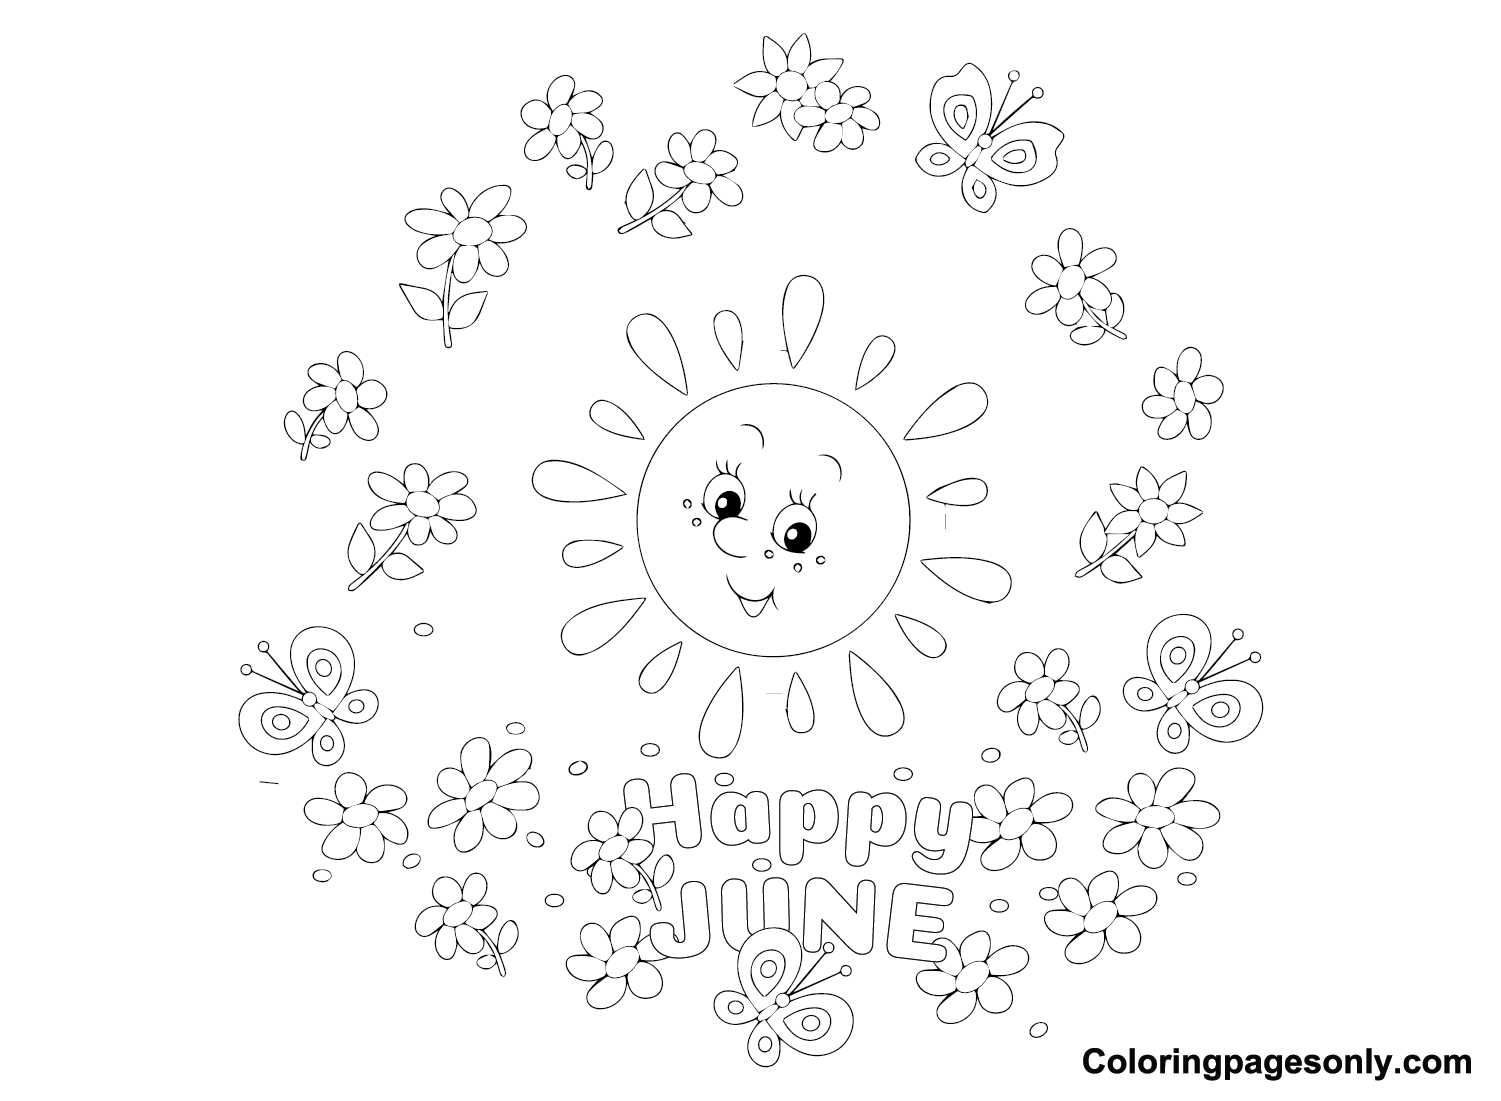 June color Sheet Coloring Page